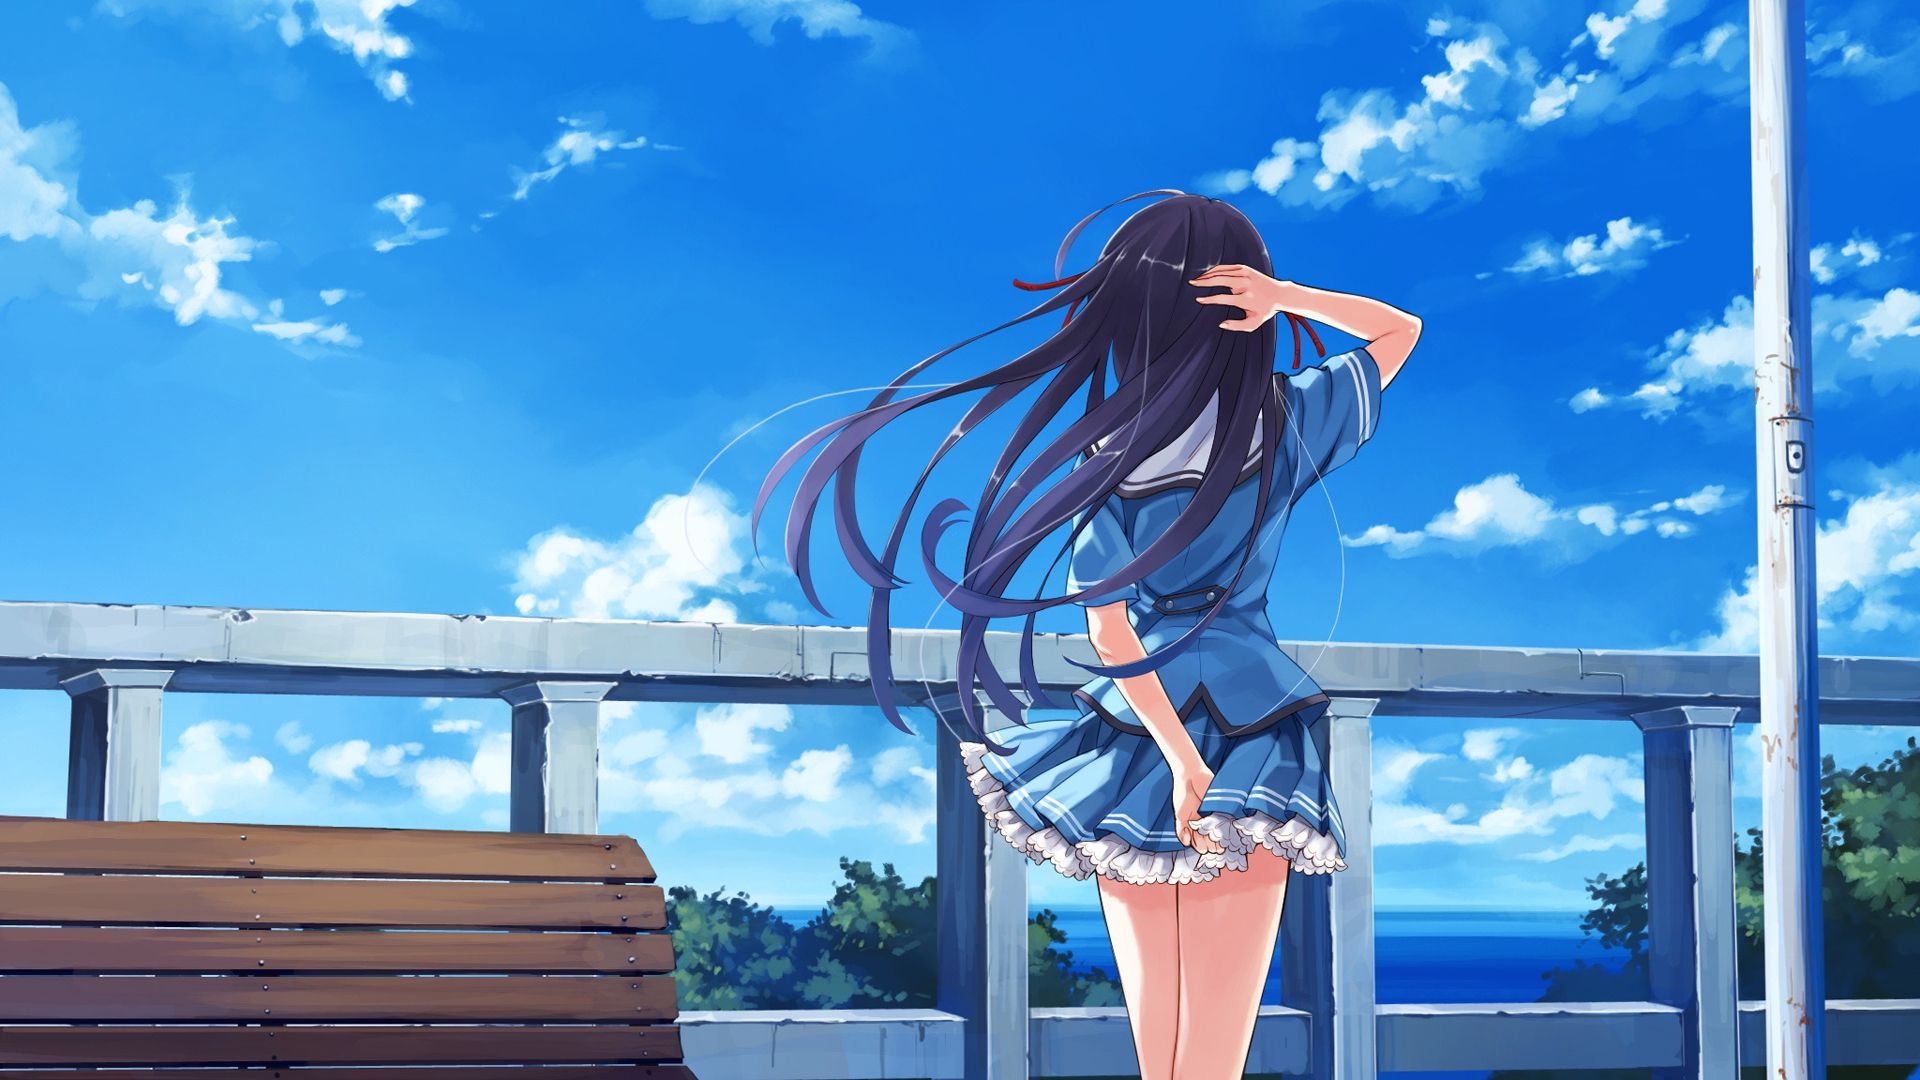 Blue anime wallpaper HD wallpaper background of your choi. Blue anime, Anime scenery, Sky anime